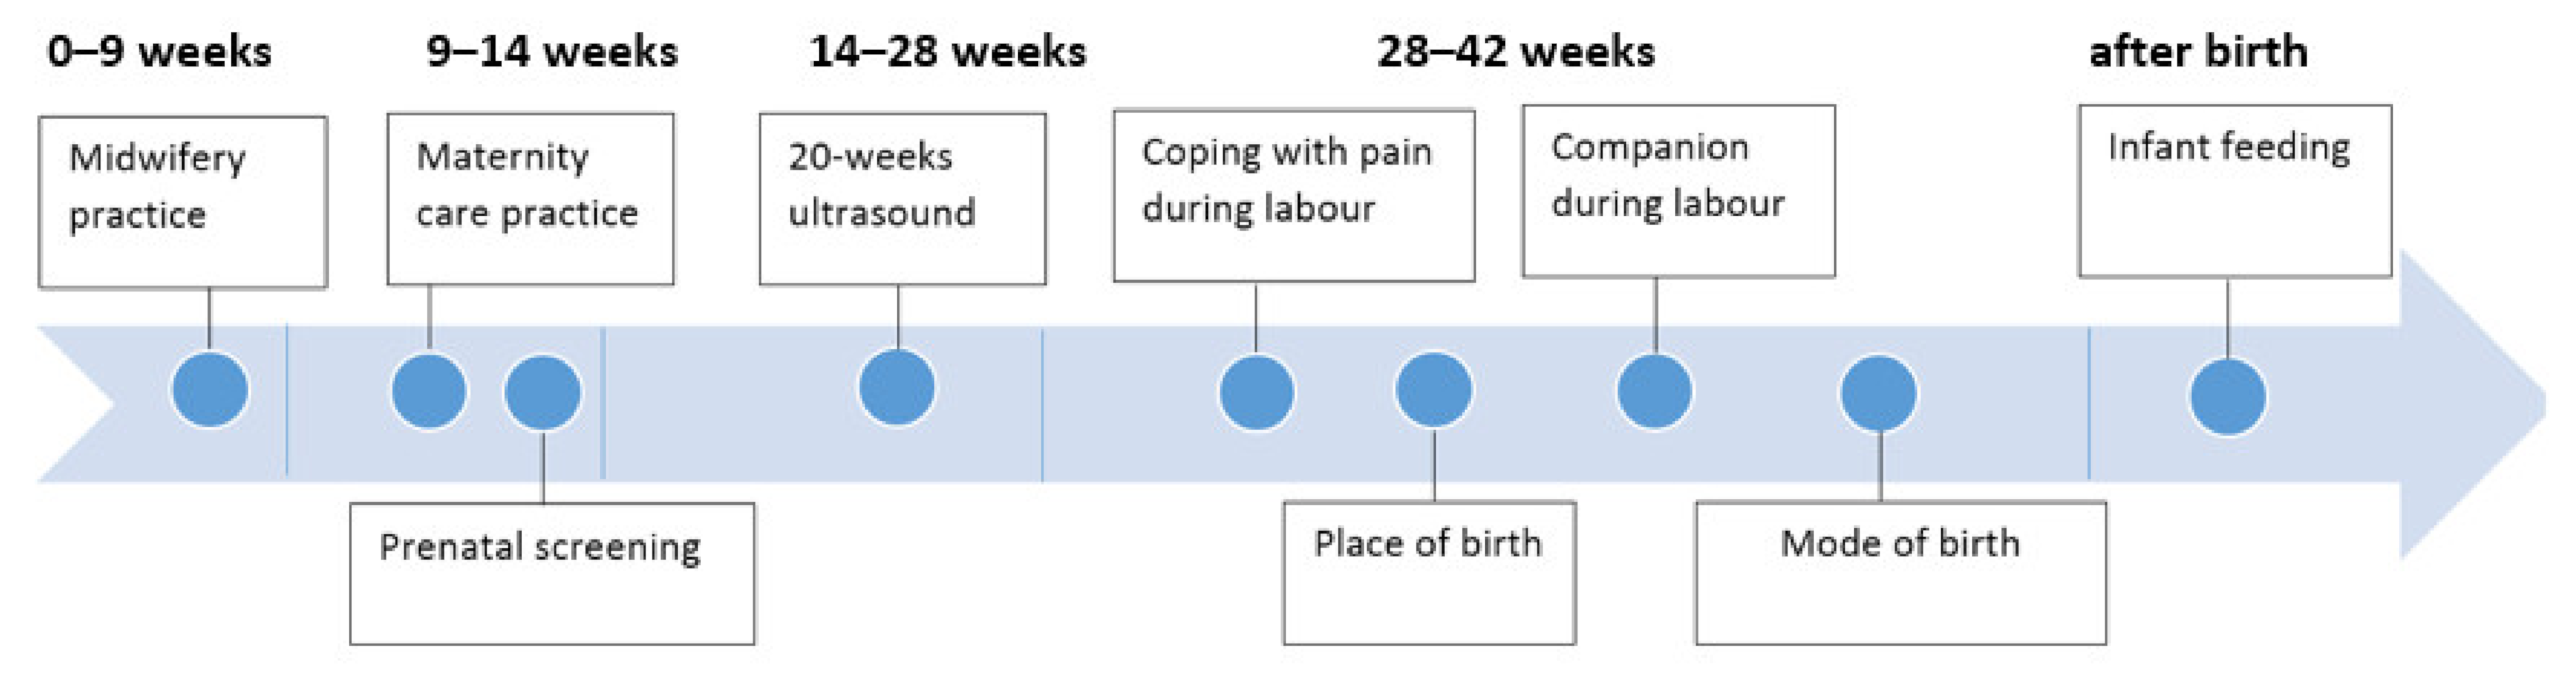 Maternity Coverage Timeline Tool